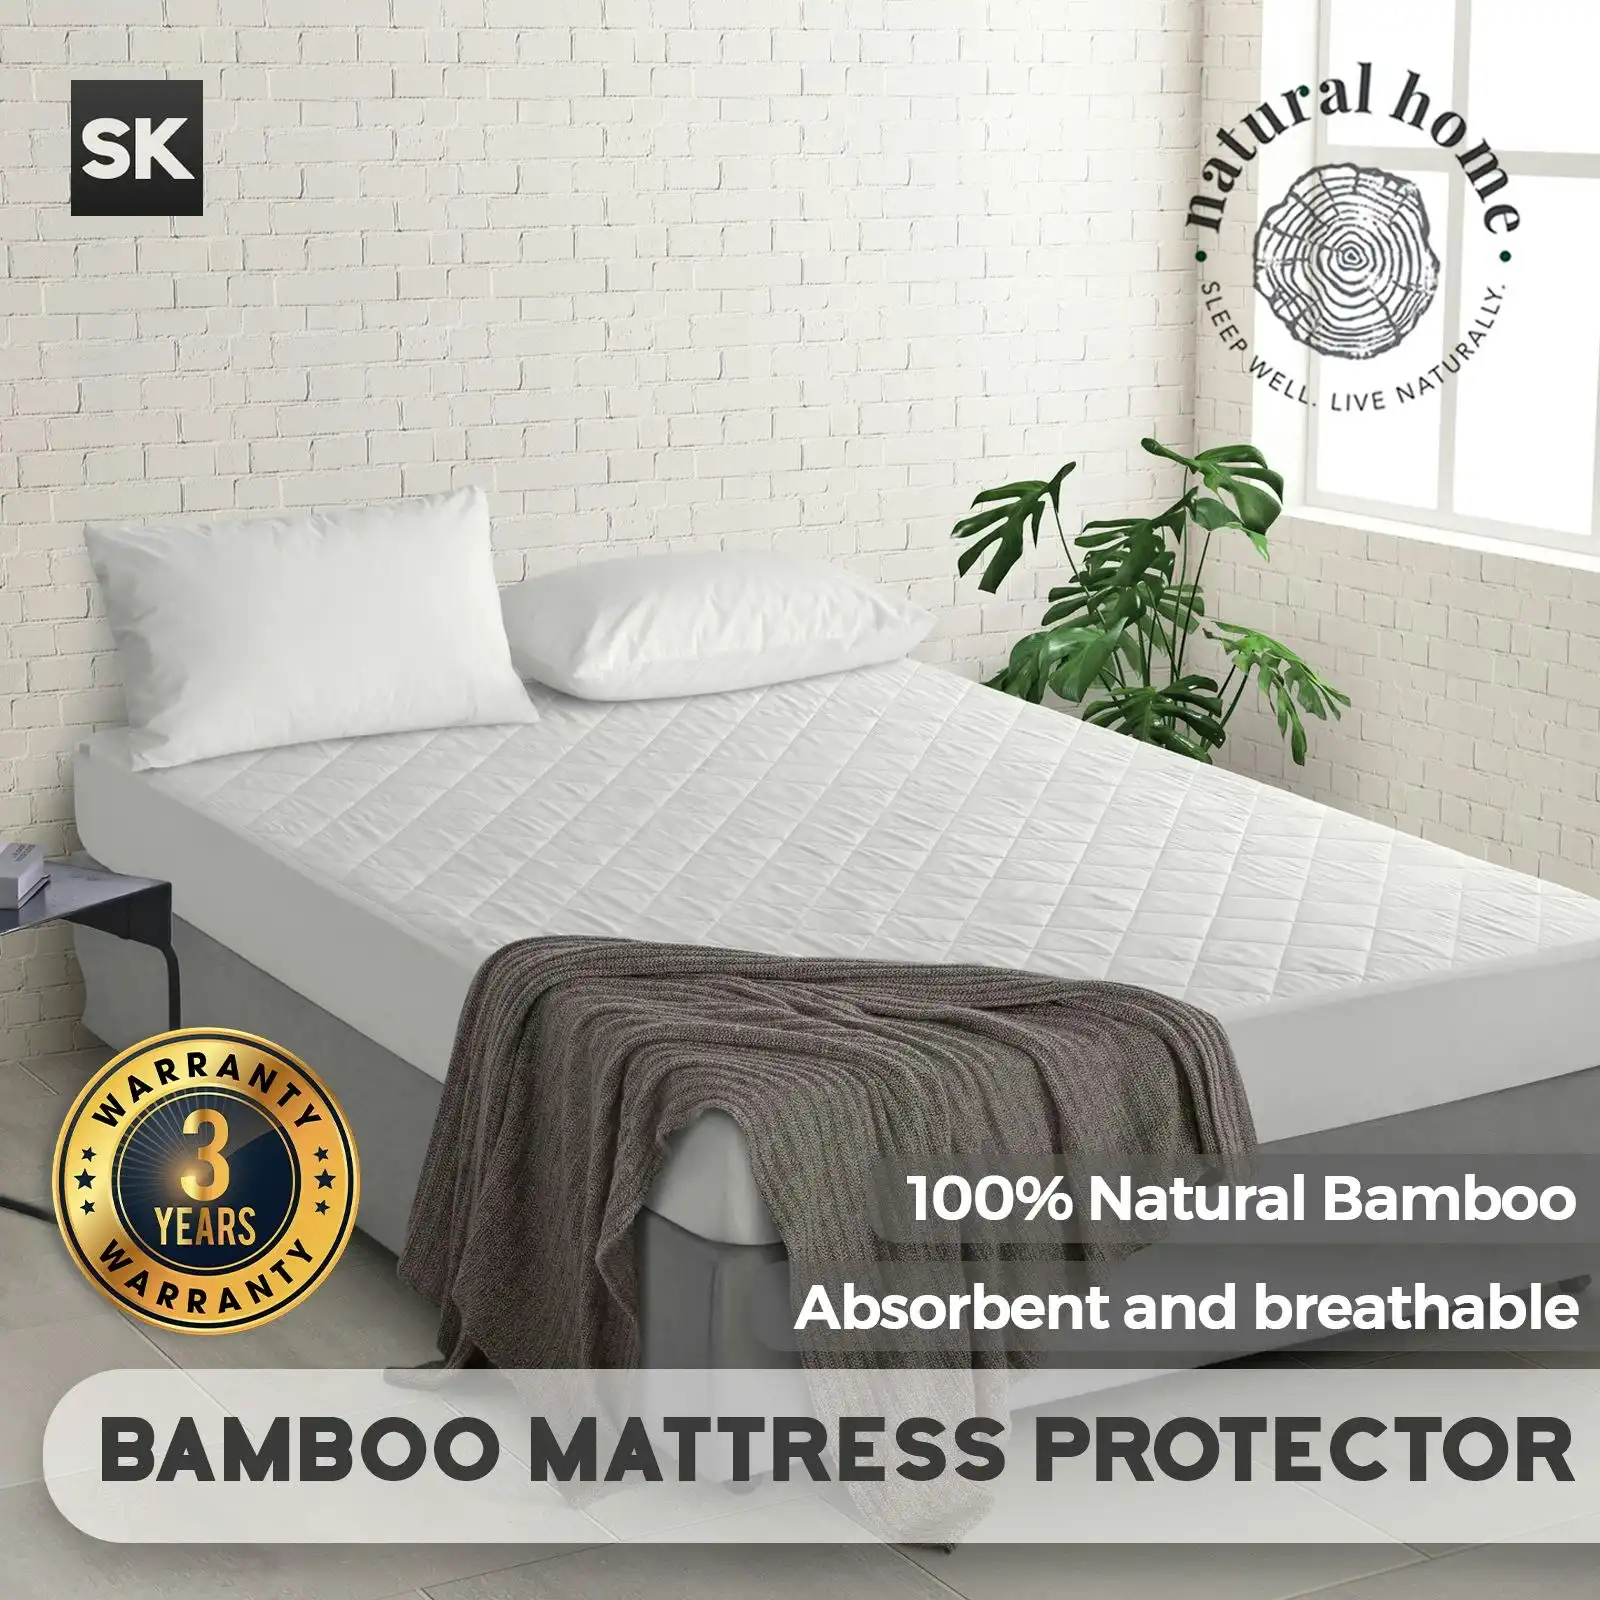 Natural Home Bamboo Quilted Mattress Protector White Super King Bed